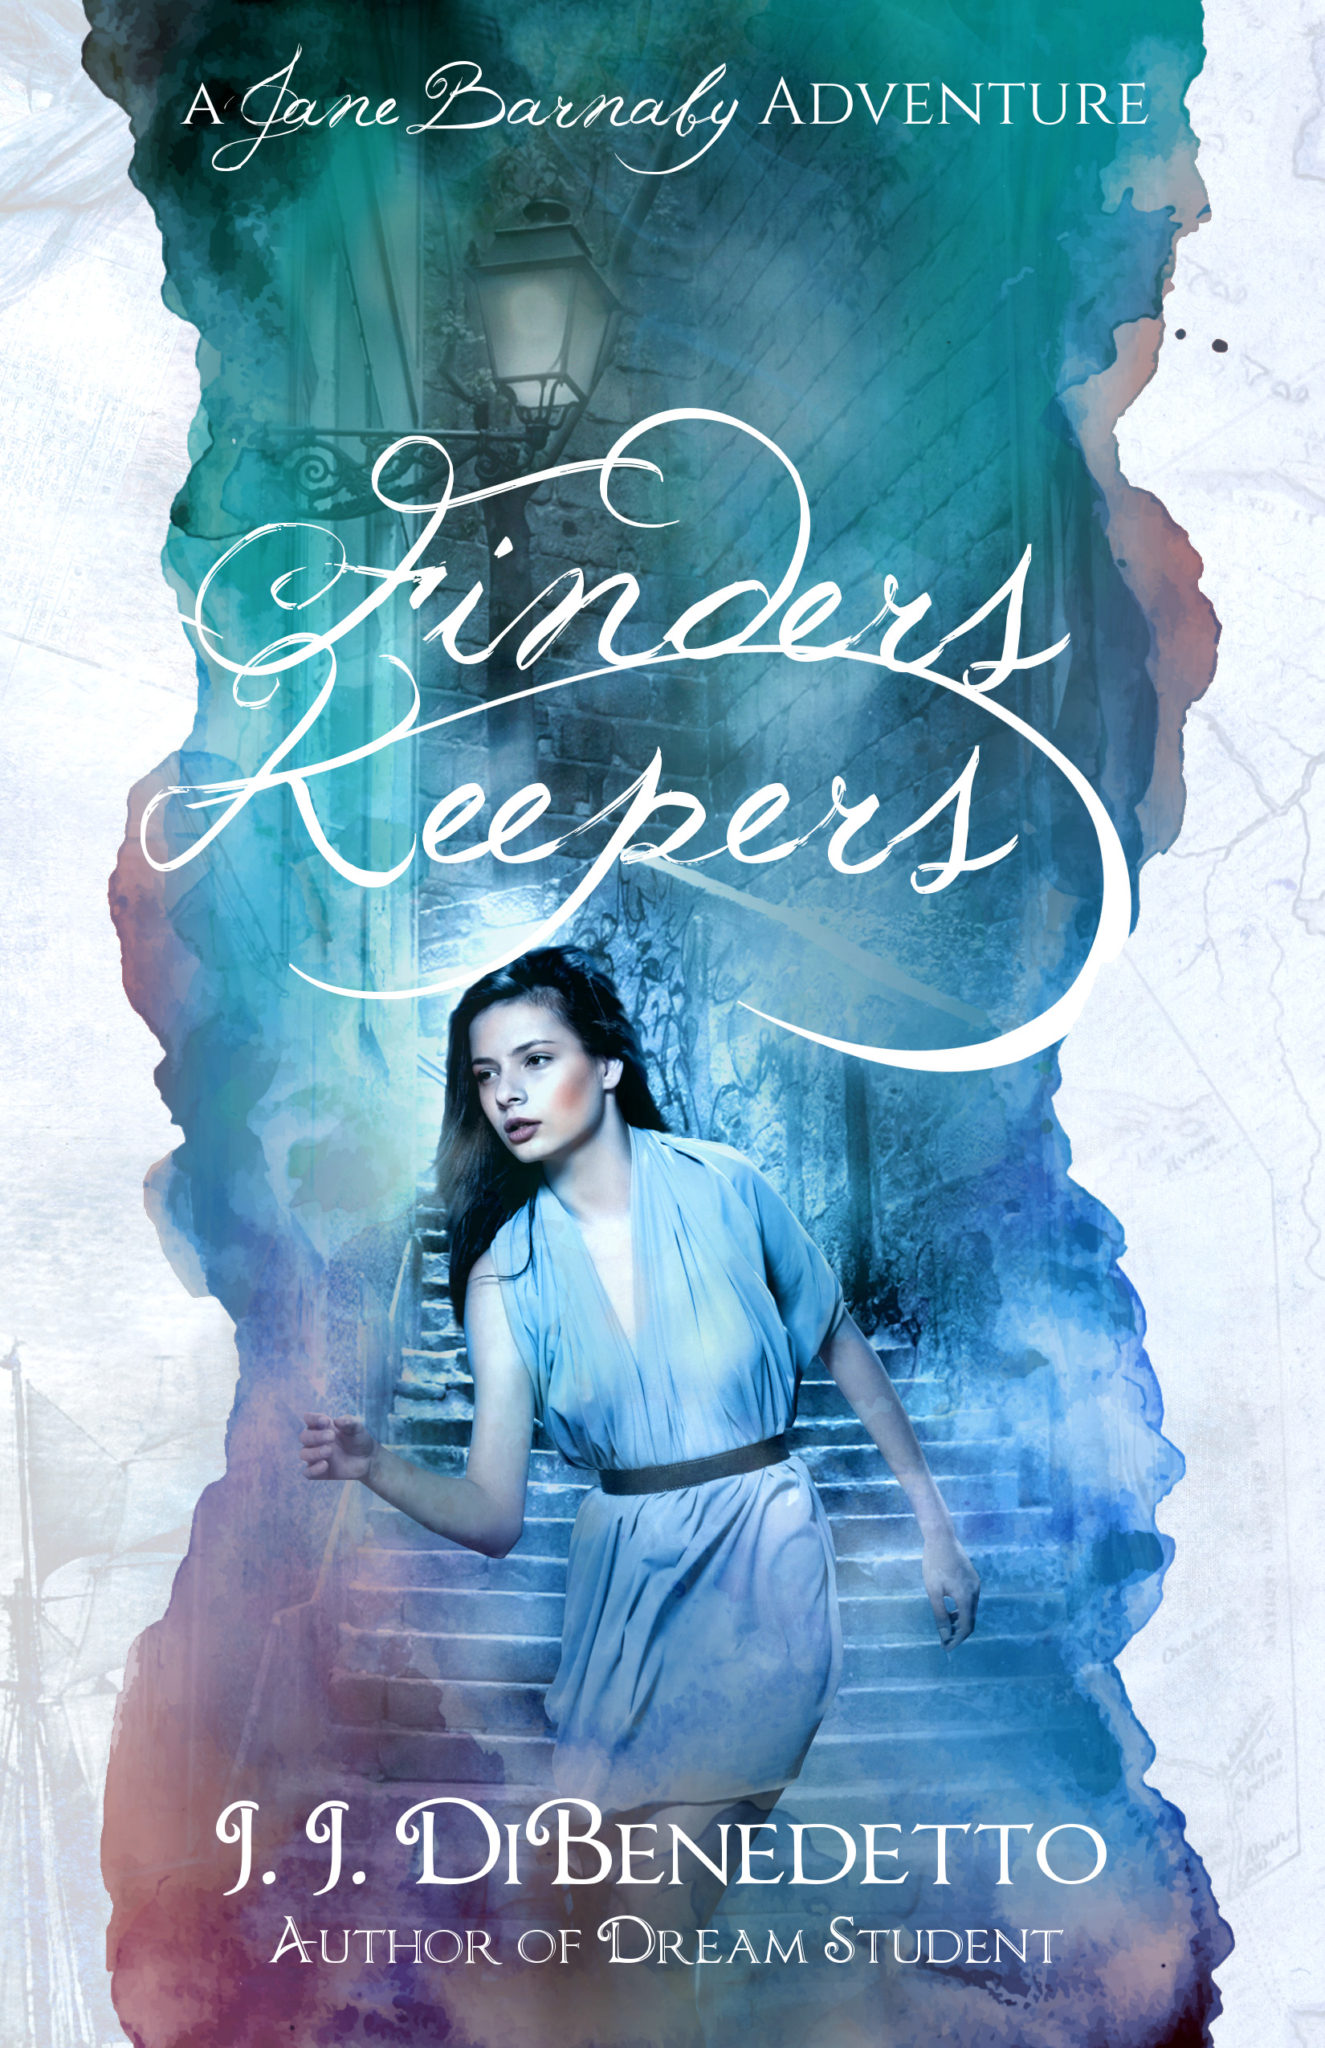 Finders Keepers by J.J. DiBenedetto